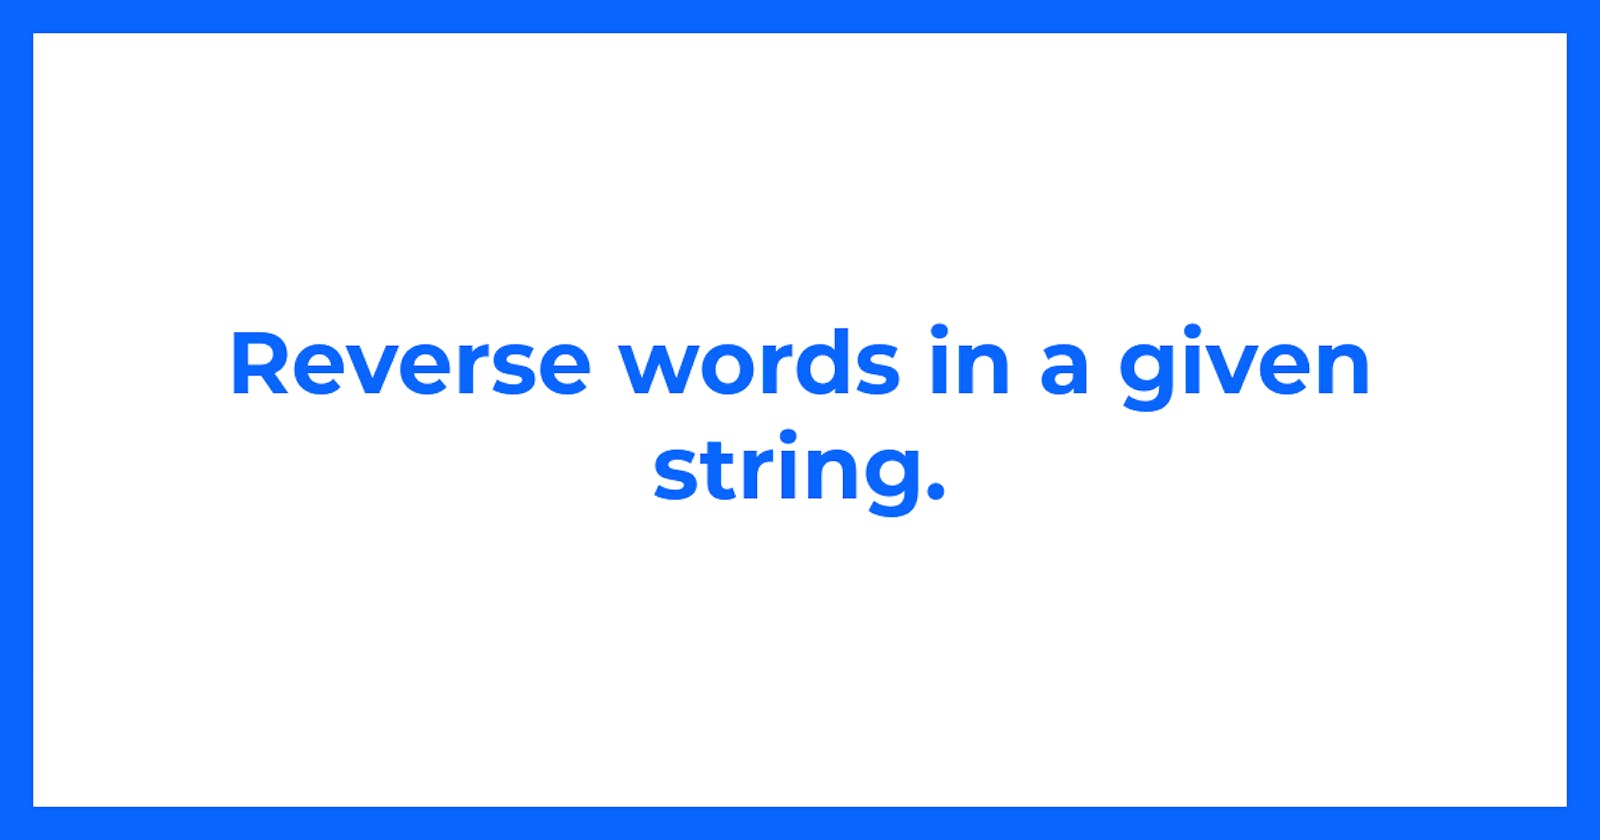 Reverse words in a given string.